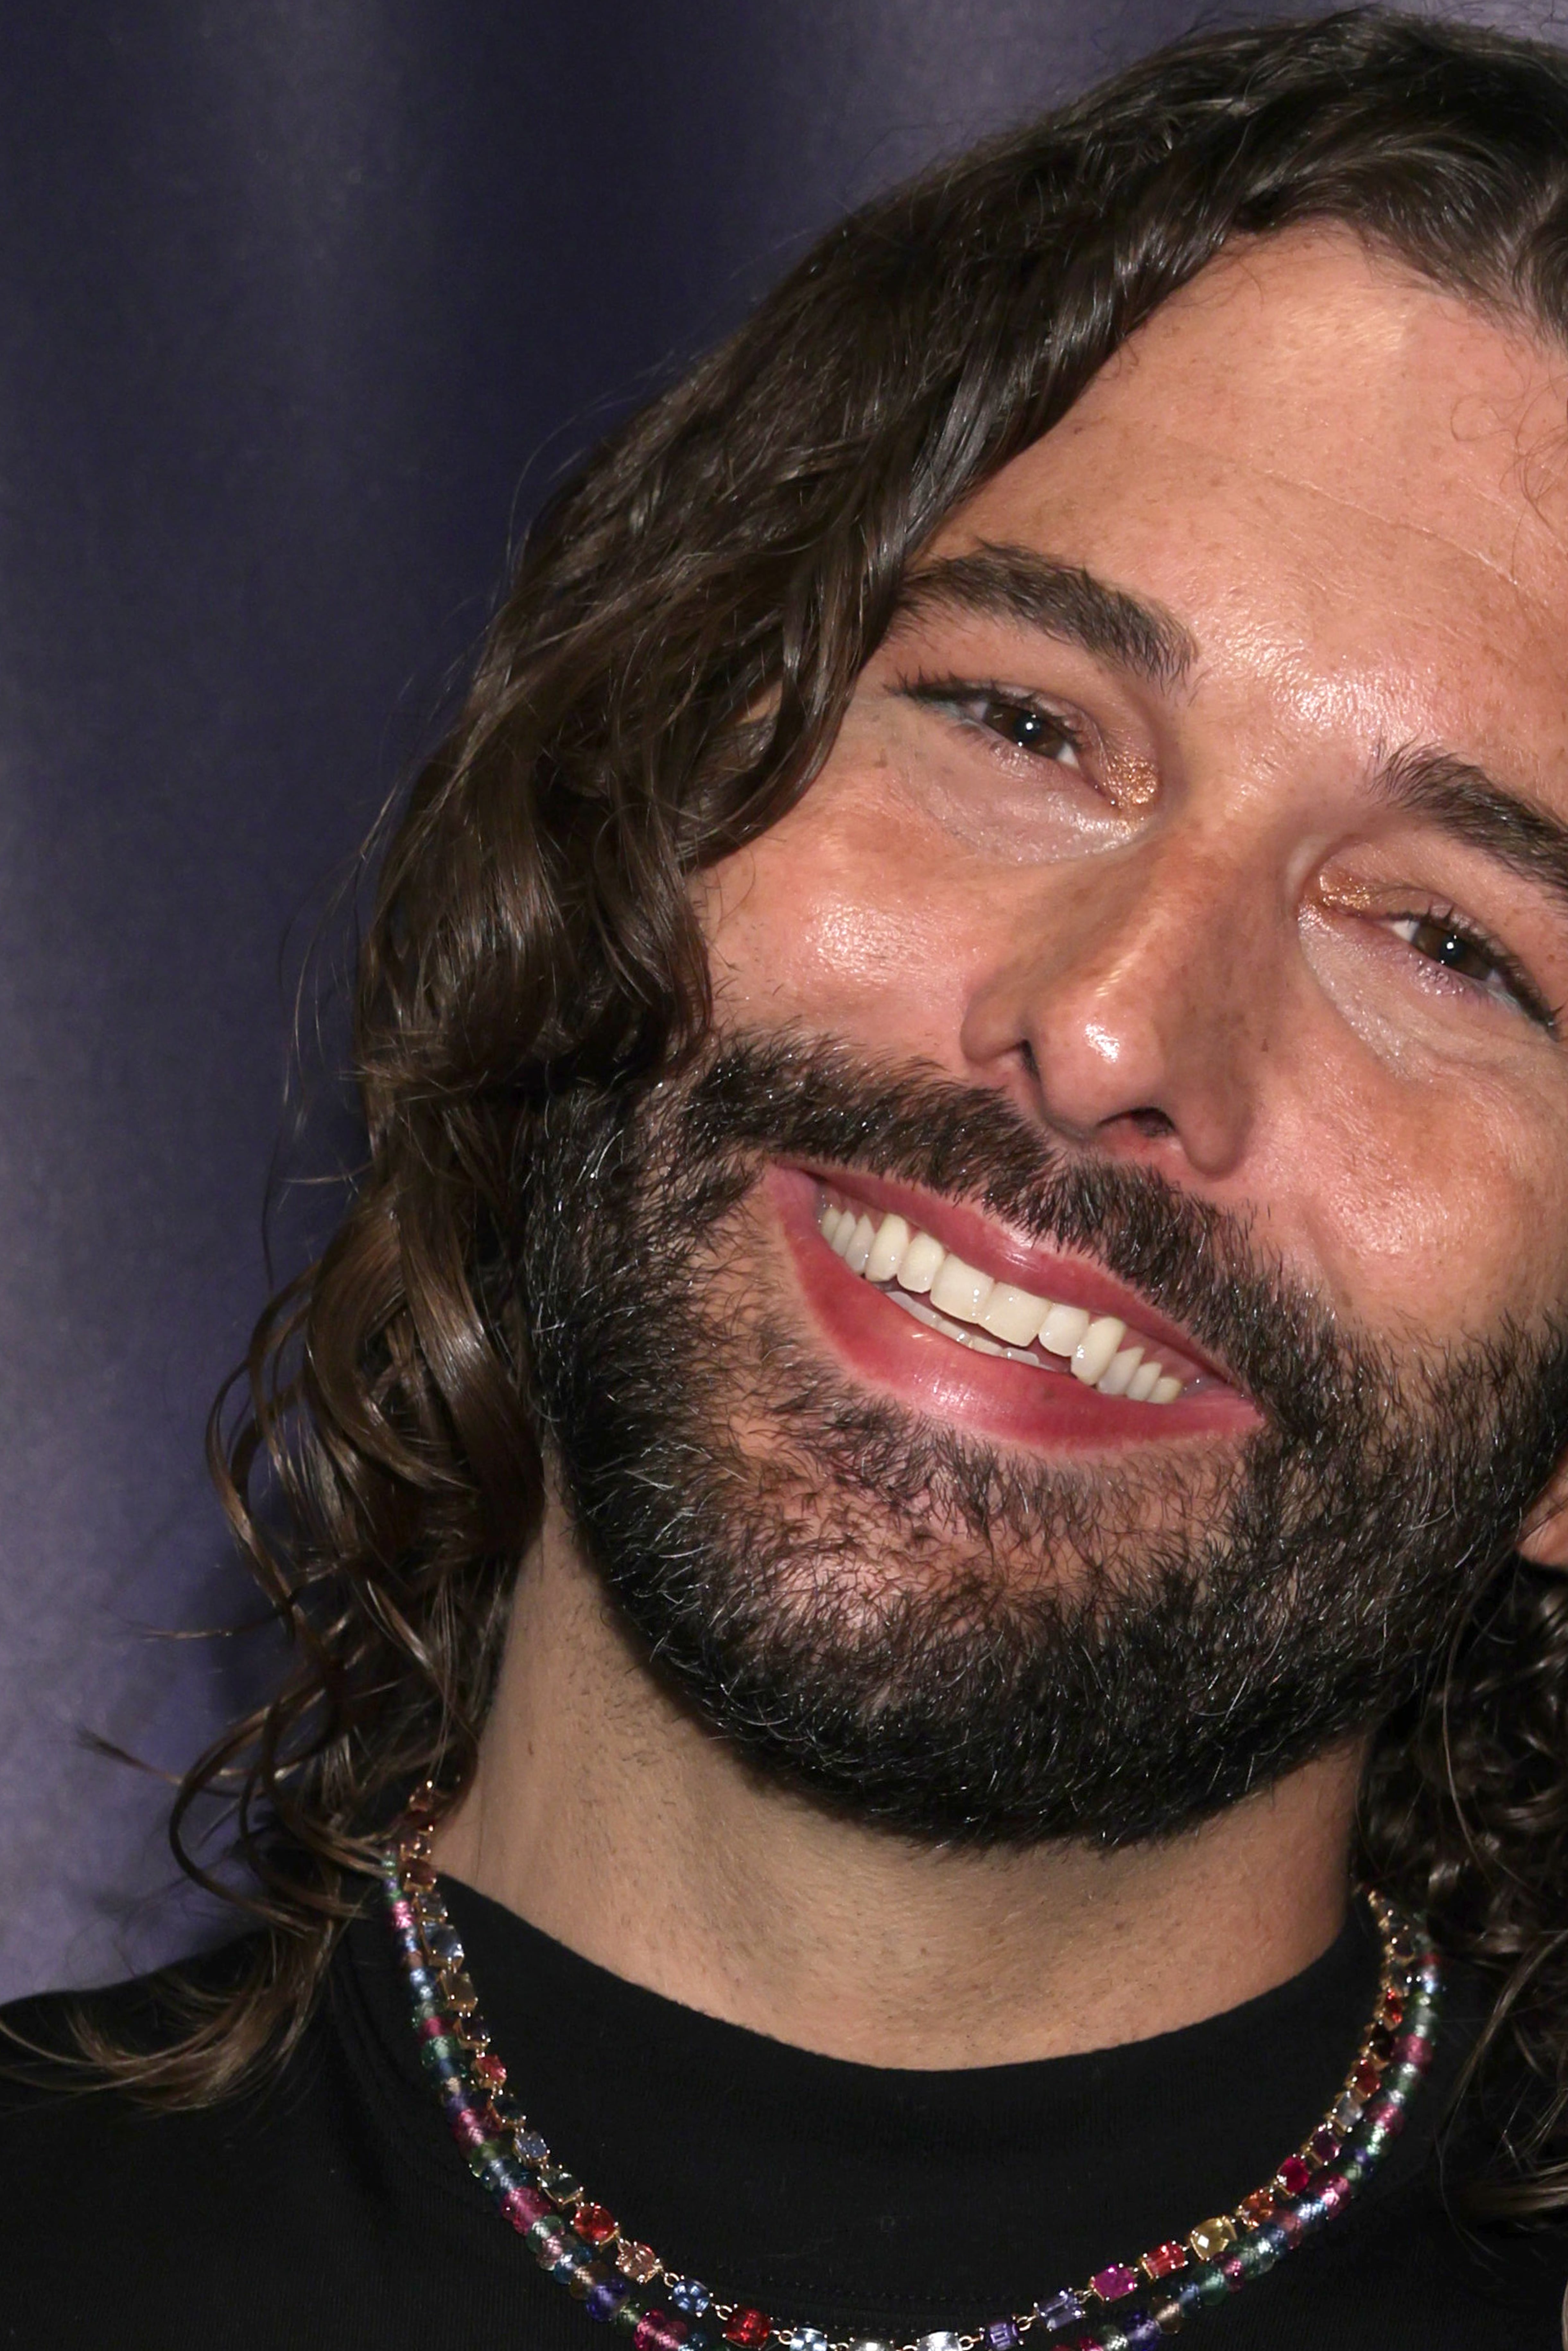 Jonathan Van Ness on the Y2K Hair Trend They Wish Hadn’t Come Back